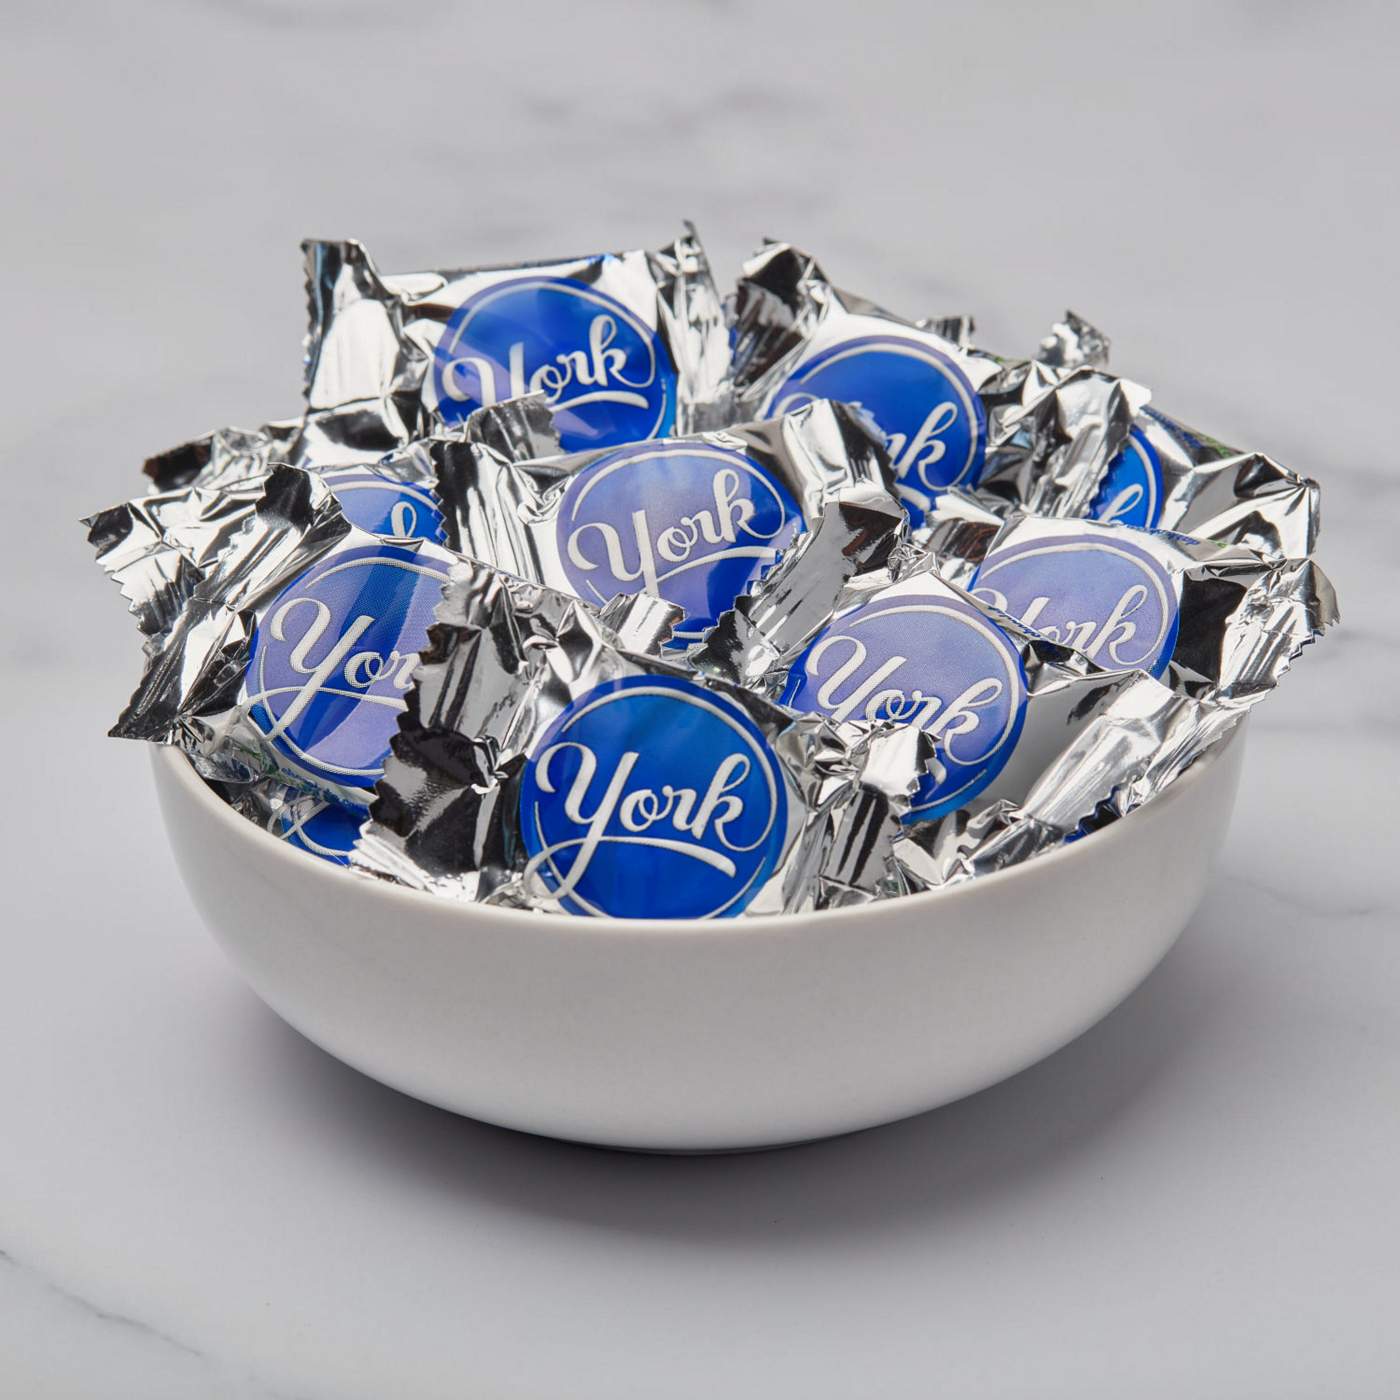 York Dark Chocolate Peppermint Patties Candy - Family Pack; image 5 of 7